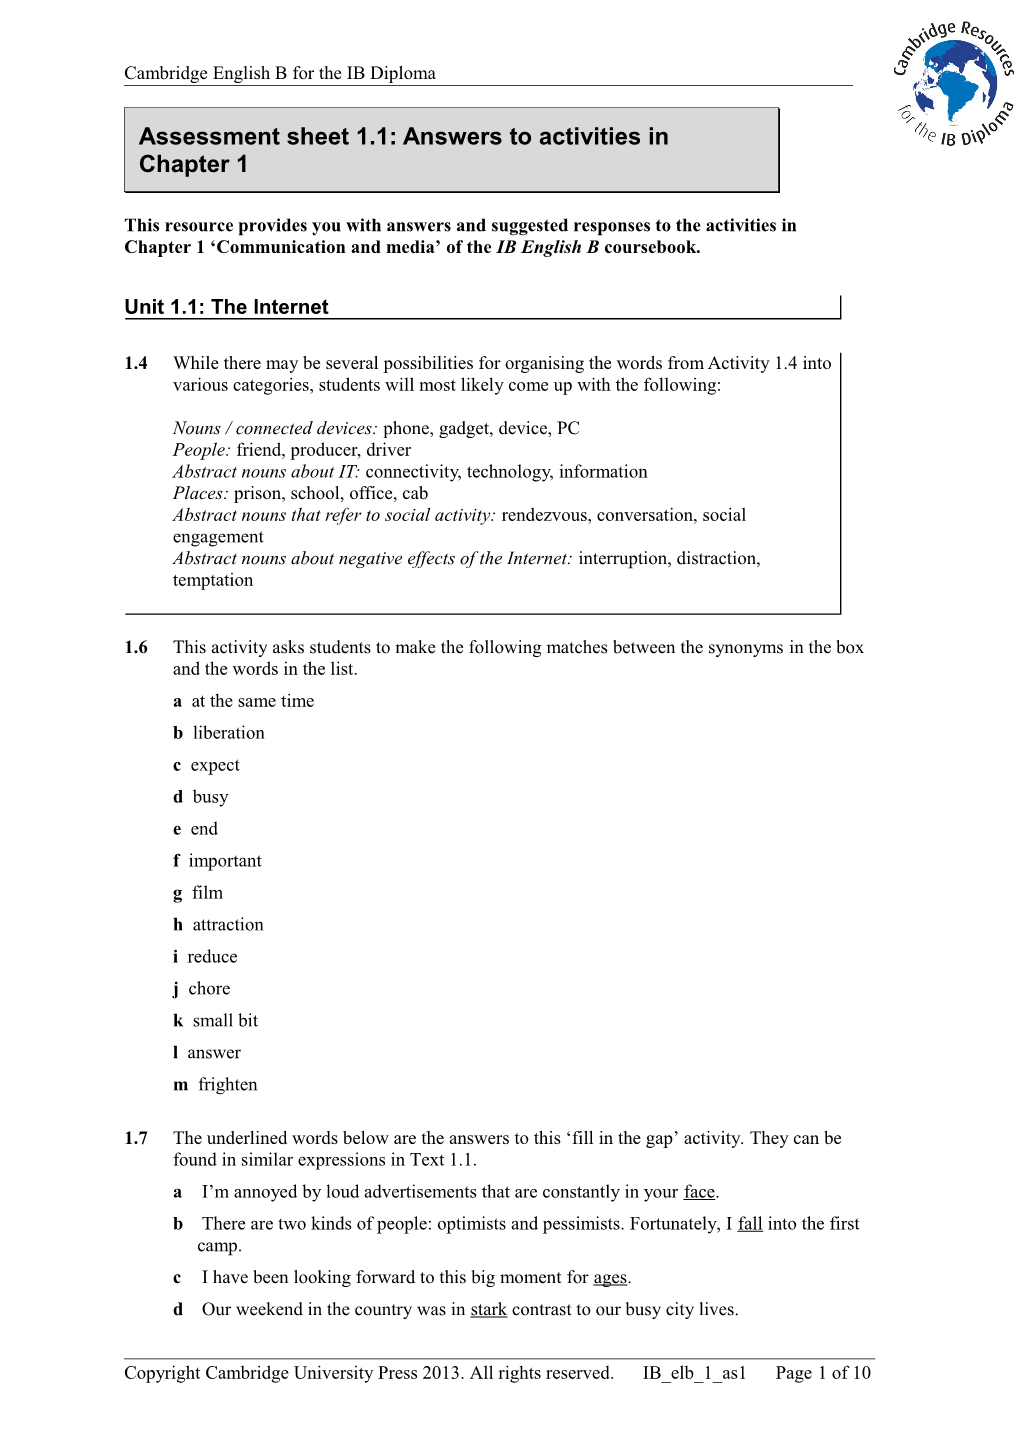 Assessment Sheet 1.1: Answers to Activities in Chapter 1